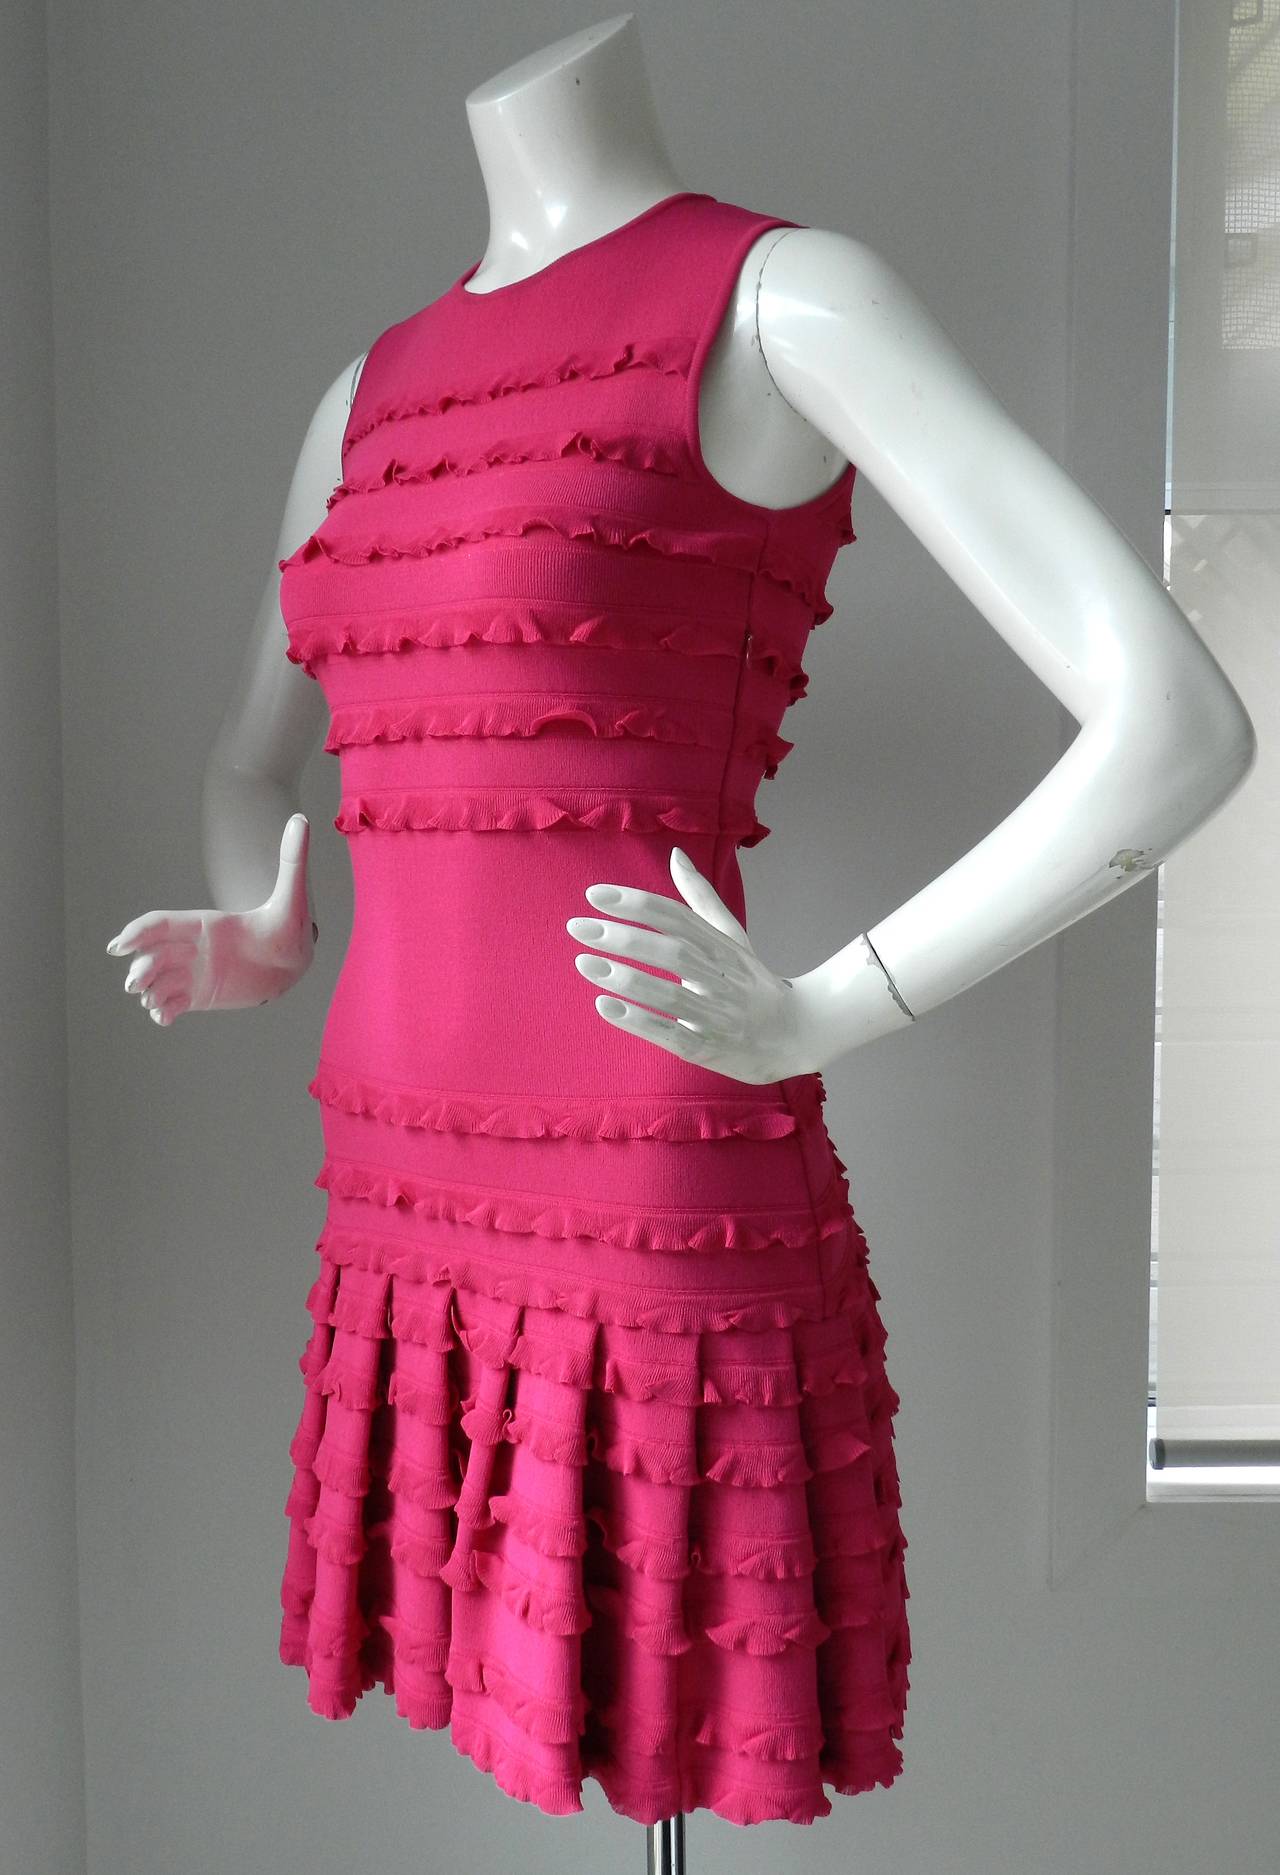 John Galliano for Christian Dior hot fuchsia stretchy tube dress. Excellent condition - unworn. Tagged size FR 38, IT 42, USA 6. Fabric is stretchy (79% viscose, 19 polyamid, and 2 elastin) and pulls on with no zippers. To fit 34